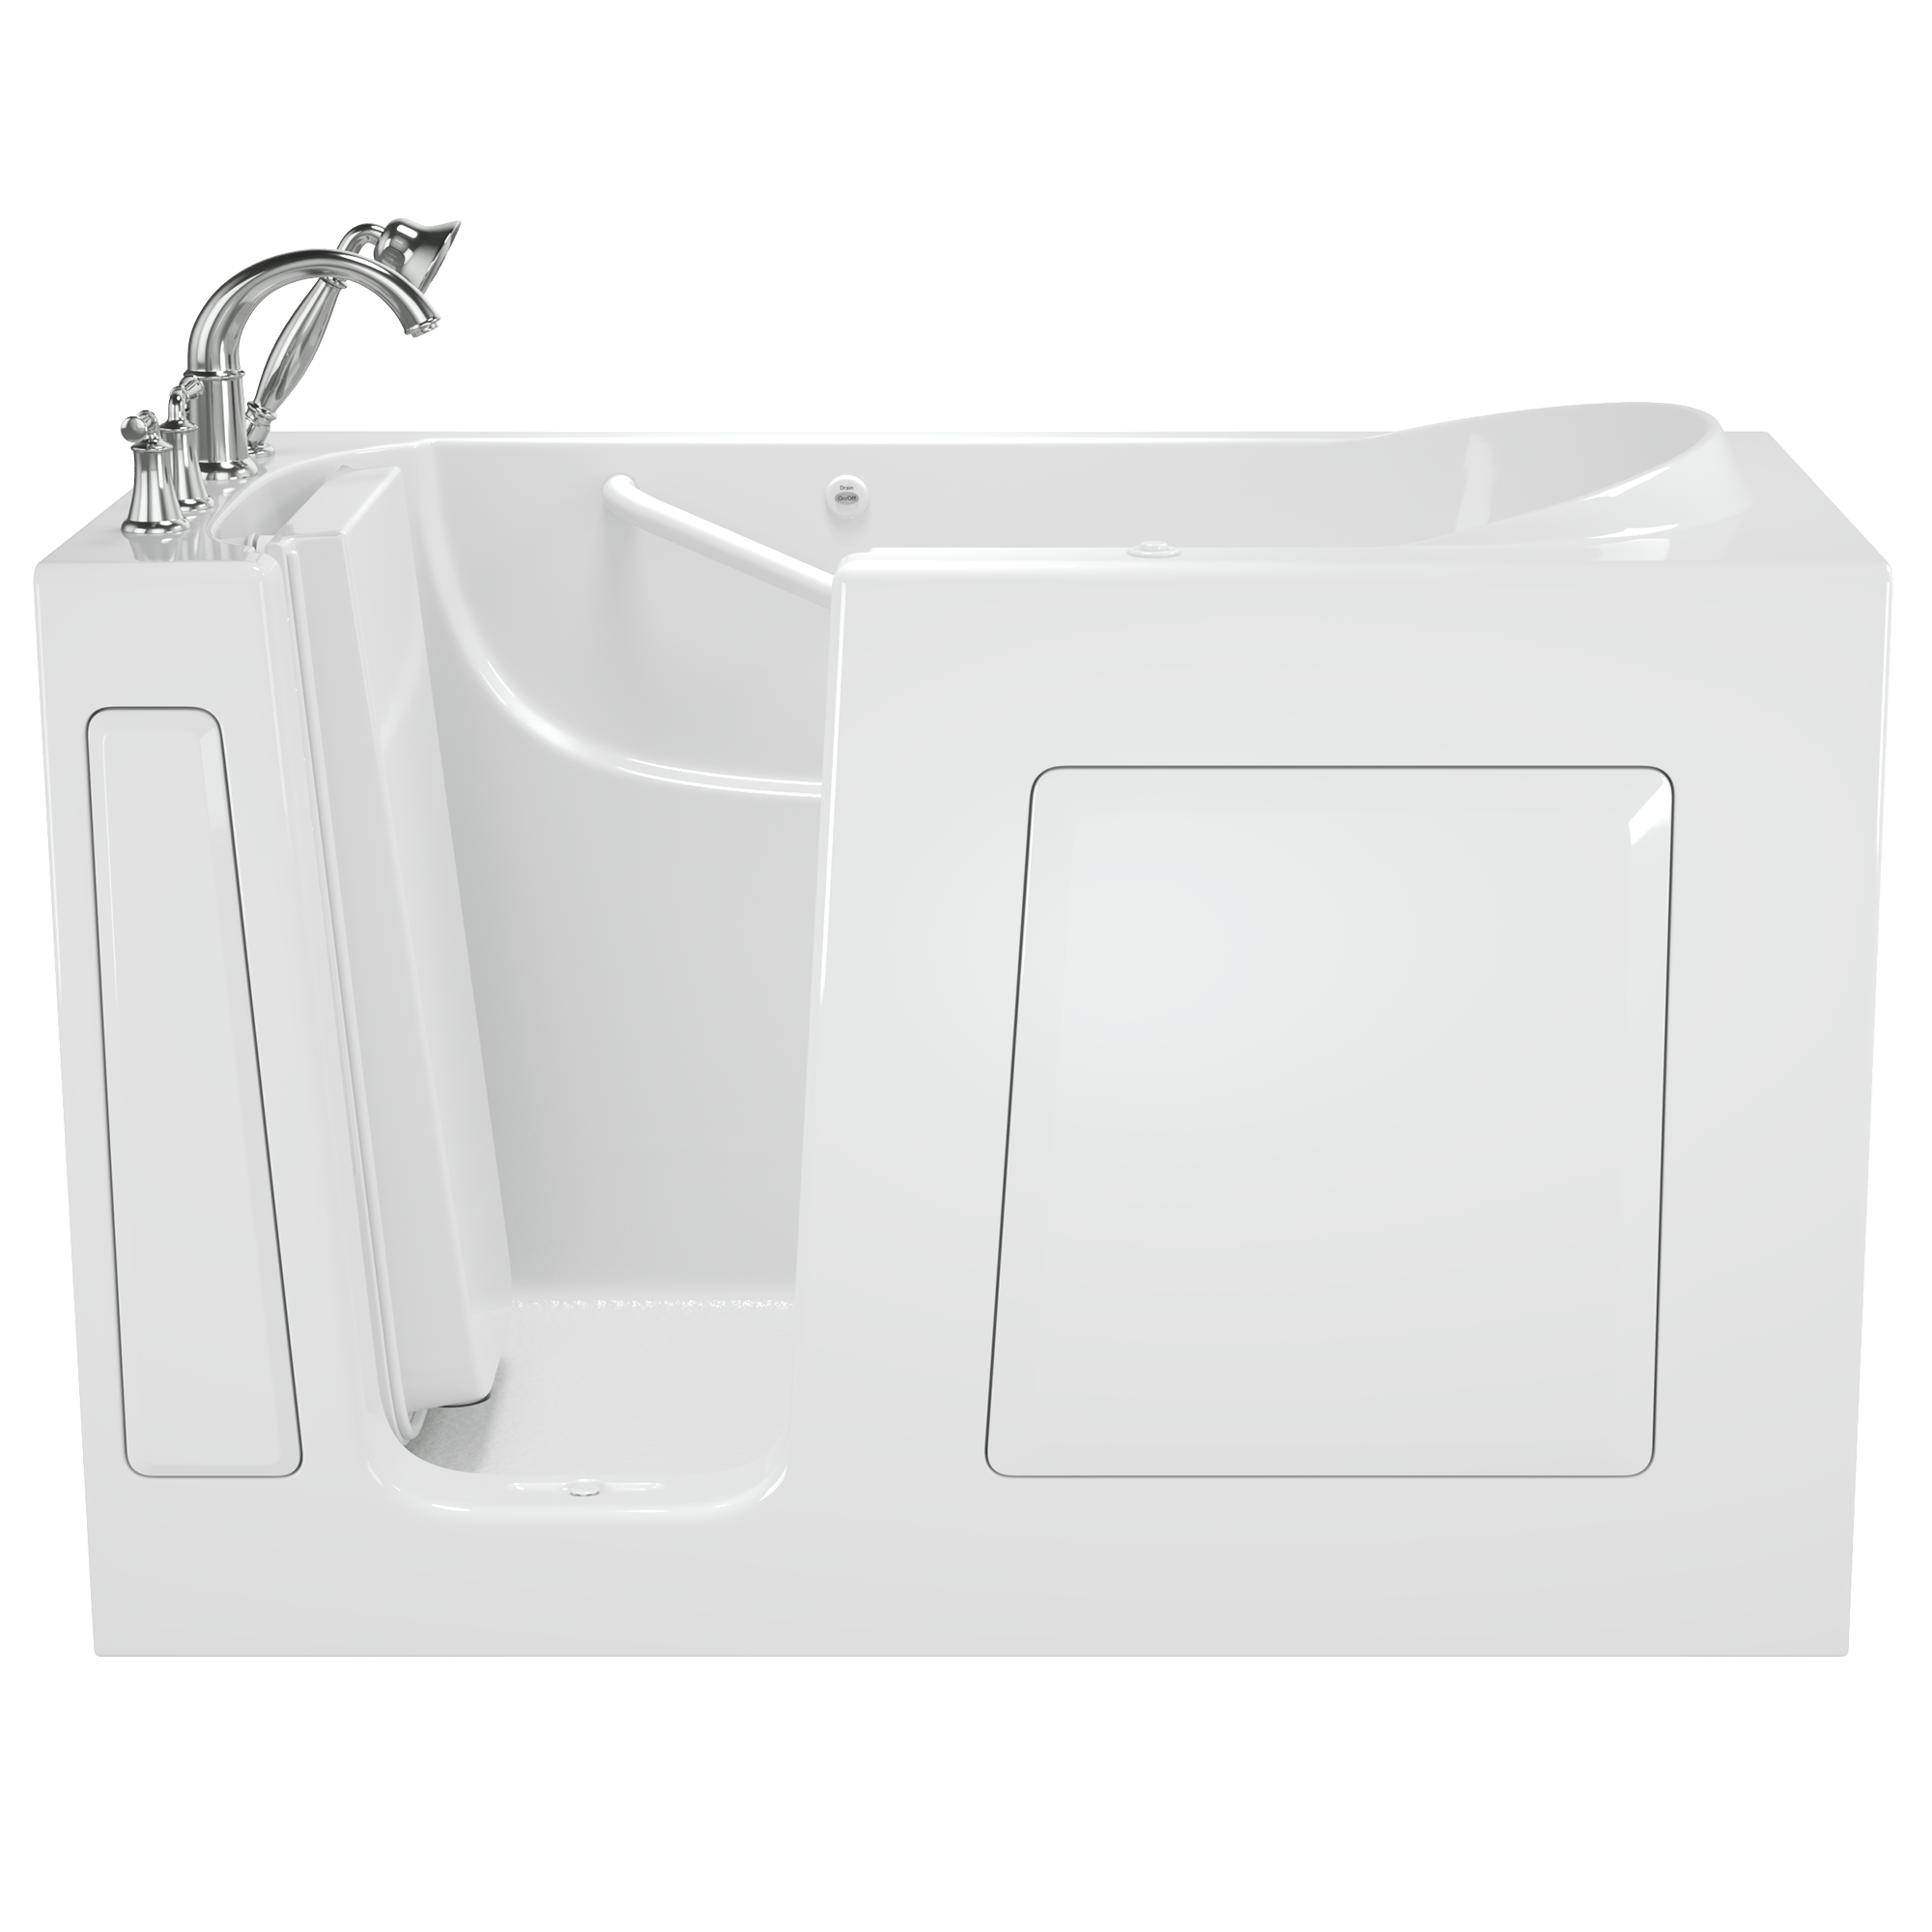 Gelcoat Value Series 30 x 60  Inch Walk in Tub With Whirlpool System   Left Hand Drain With Faucet WIB WHITE